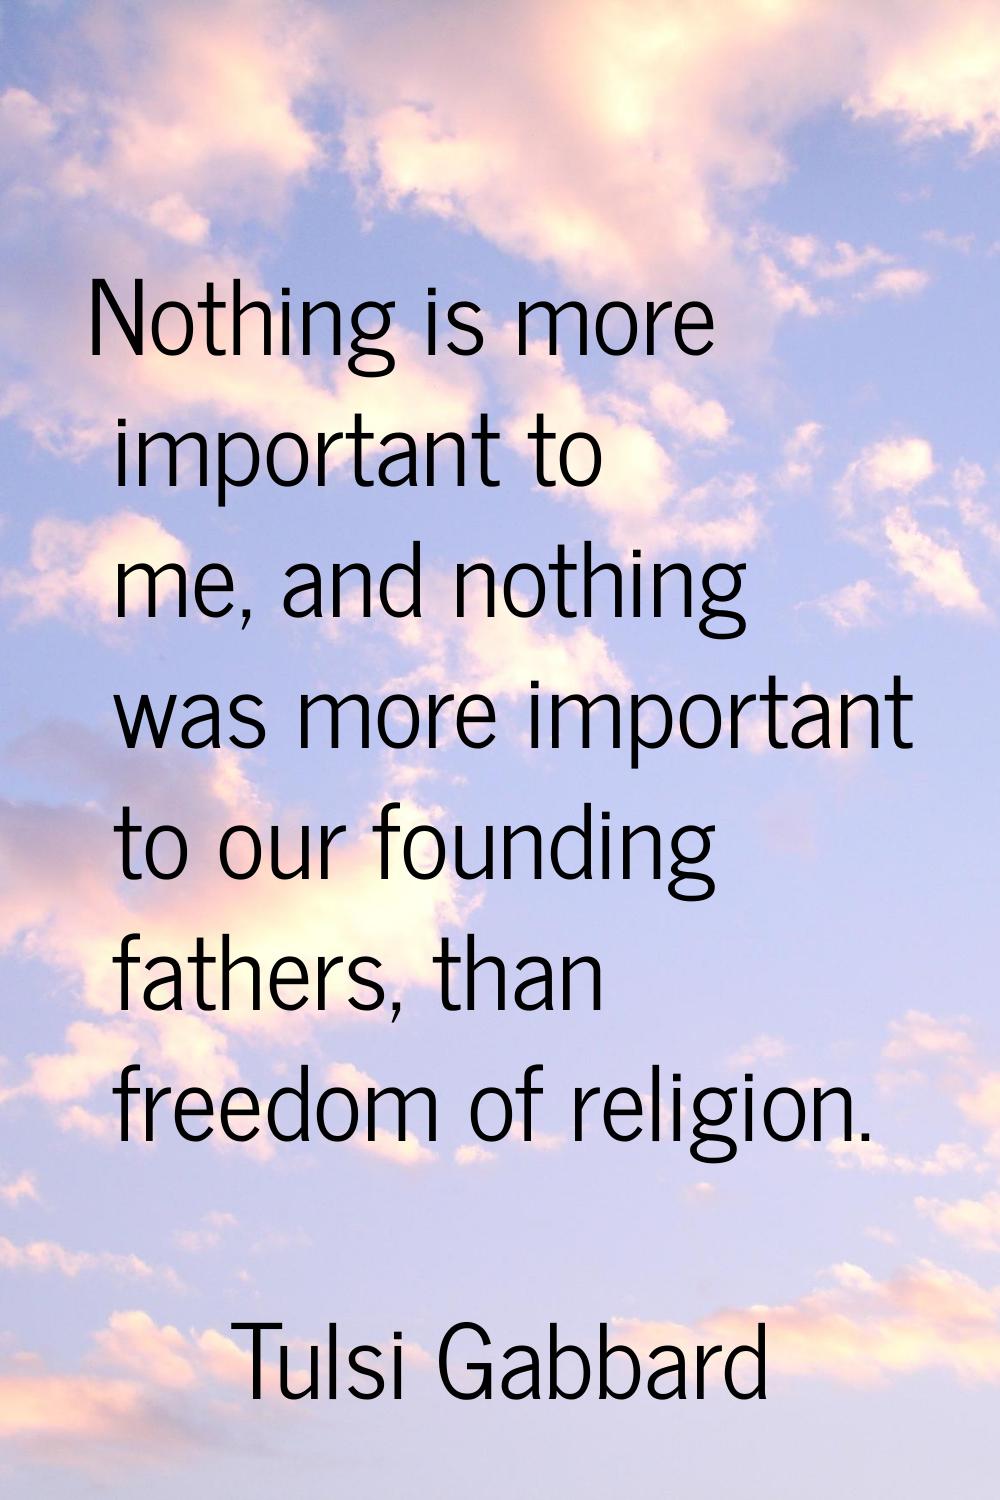 Nothing is more important to me, and nothing was more important to our founding fathers, than freed